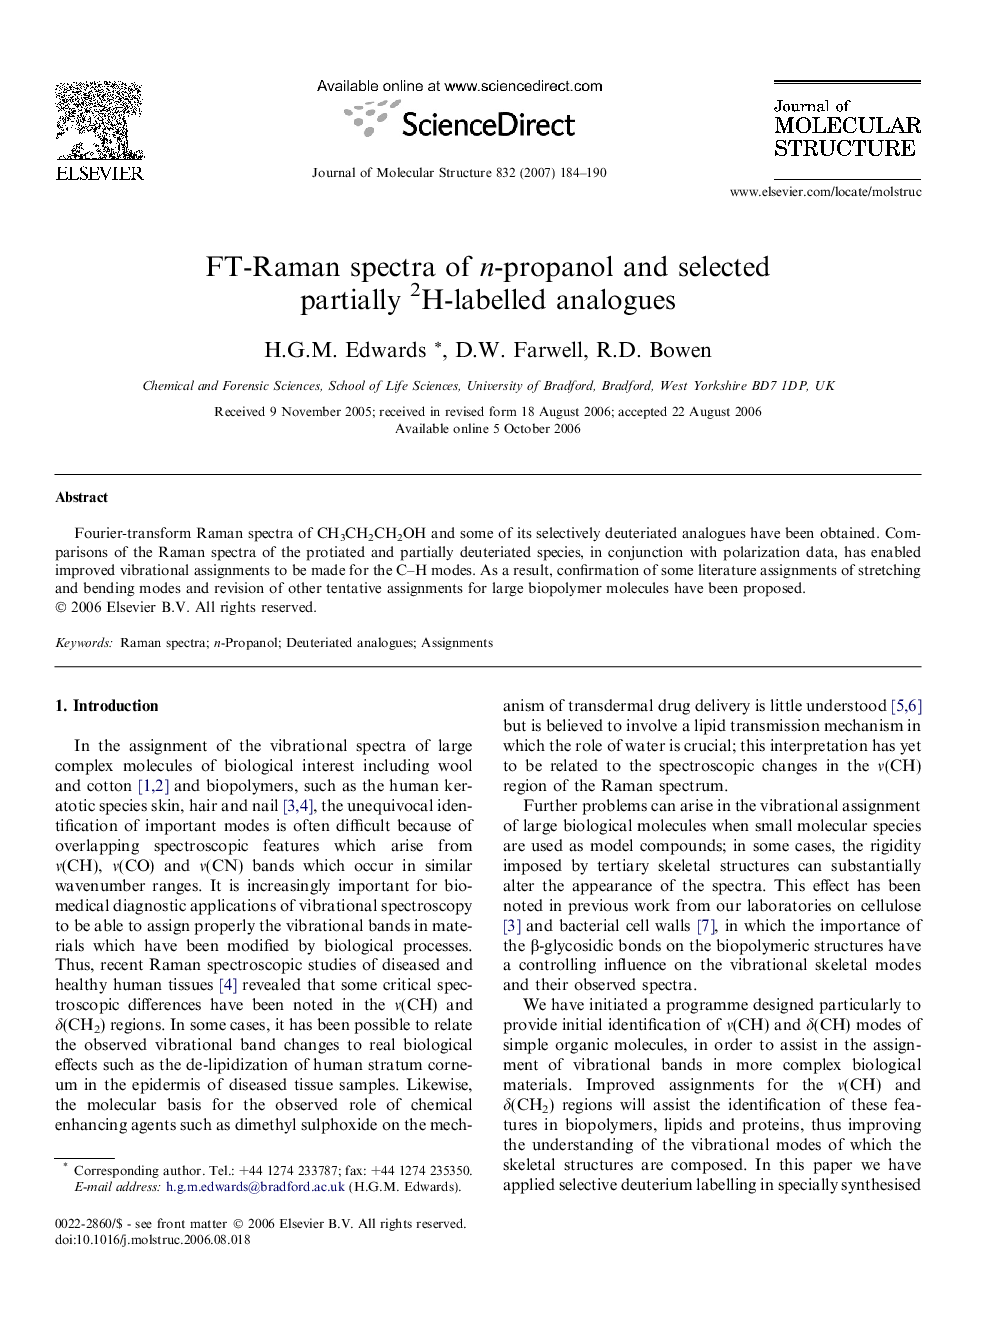 FT-Raman spectra of n-propanol and selected partially 2H-labelled analogues